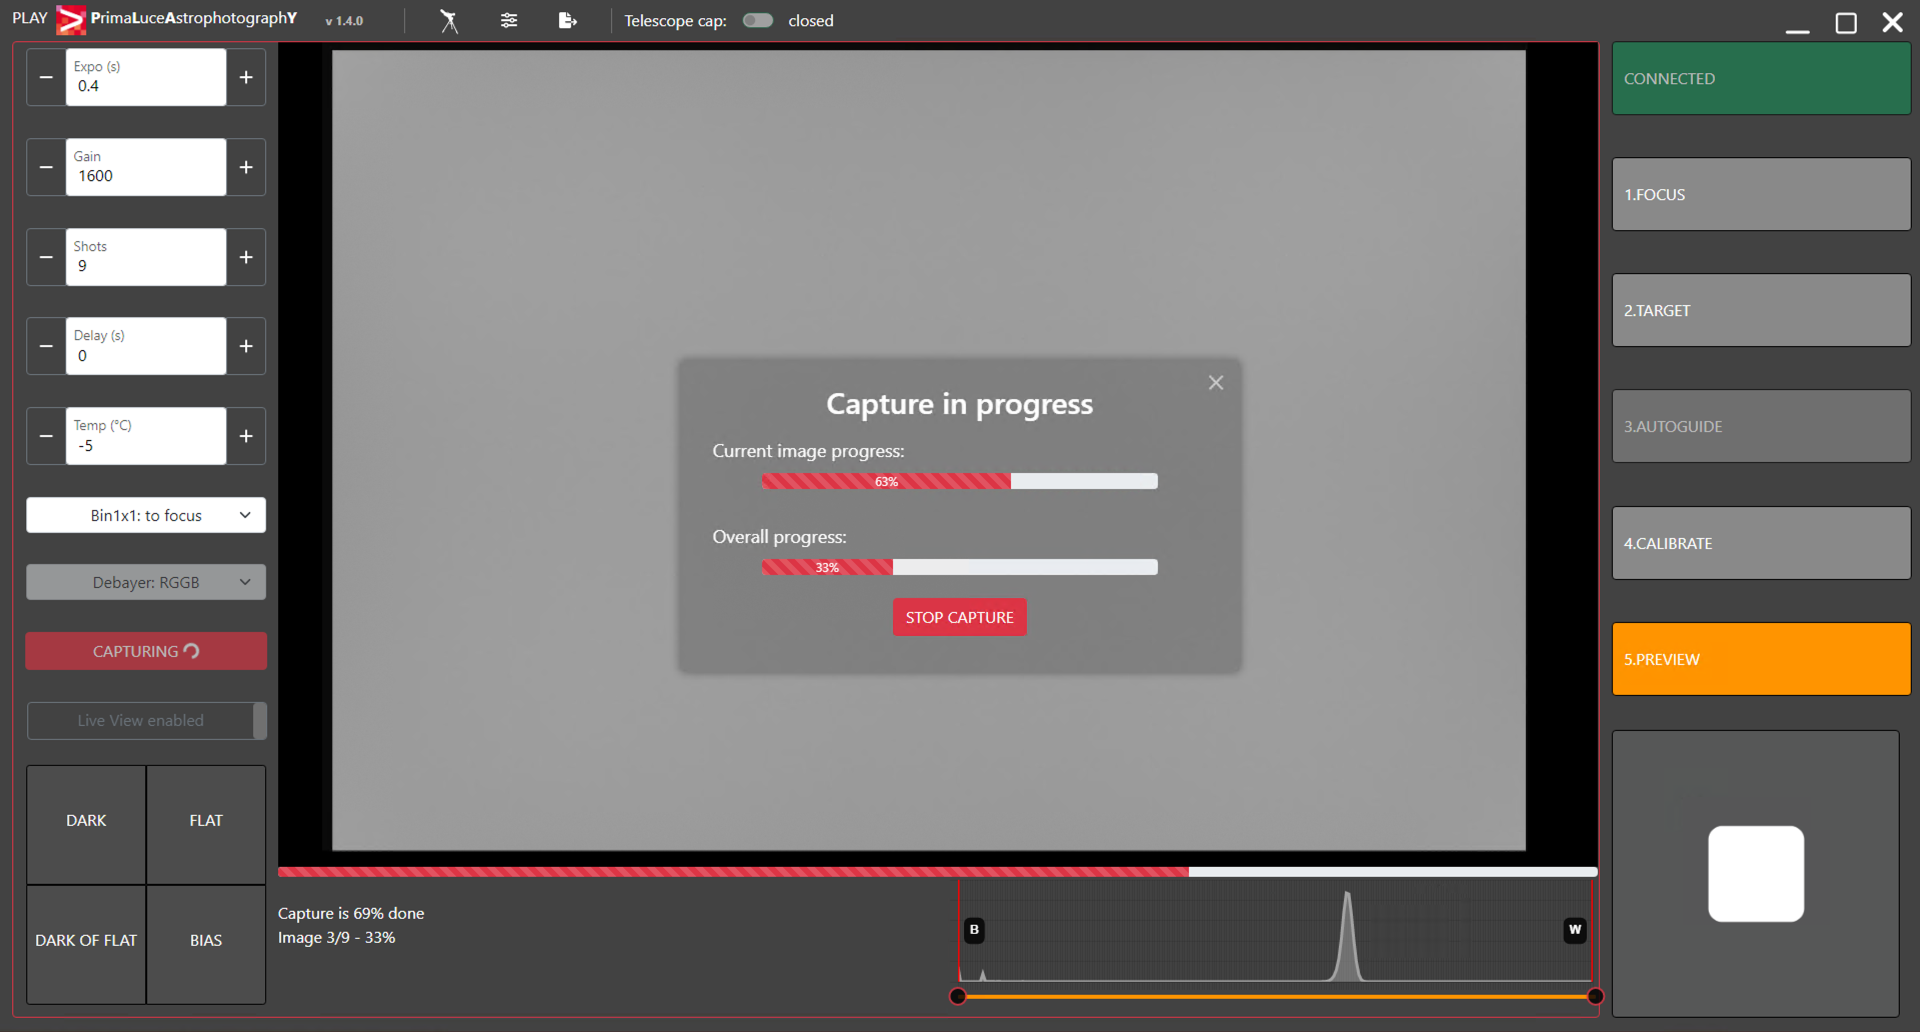 How to record FLAT calibration frames with GIOTTO and PLAY